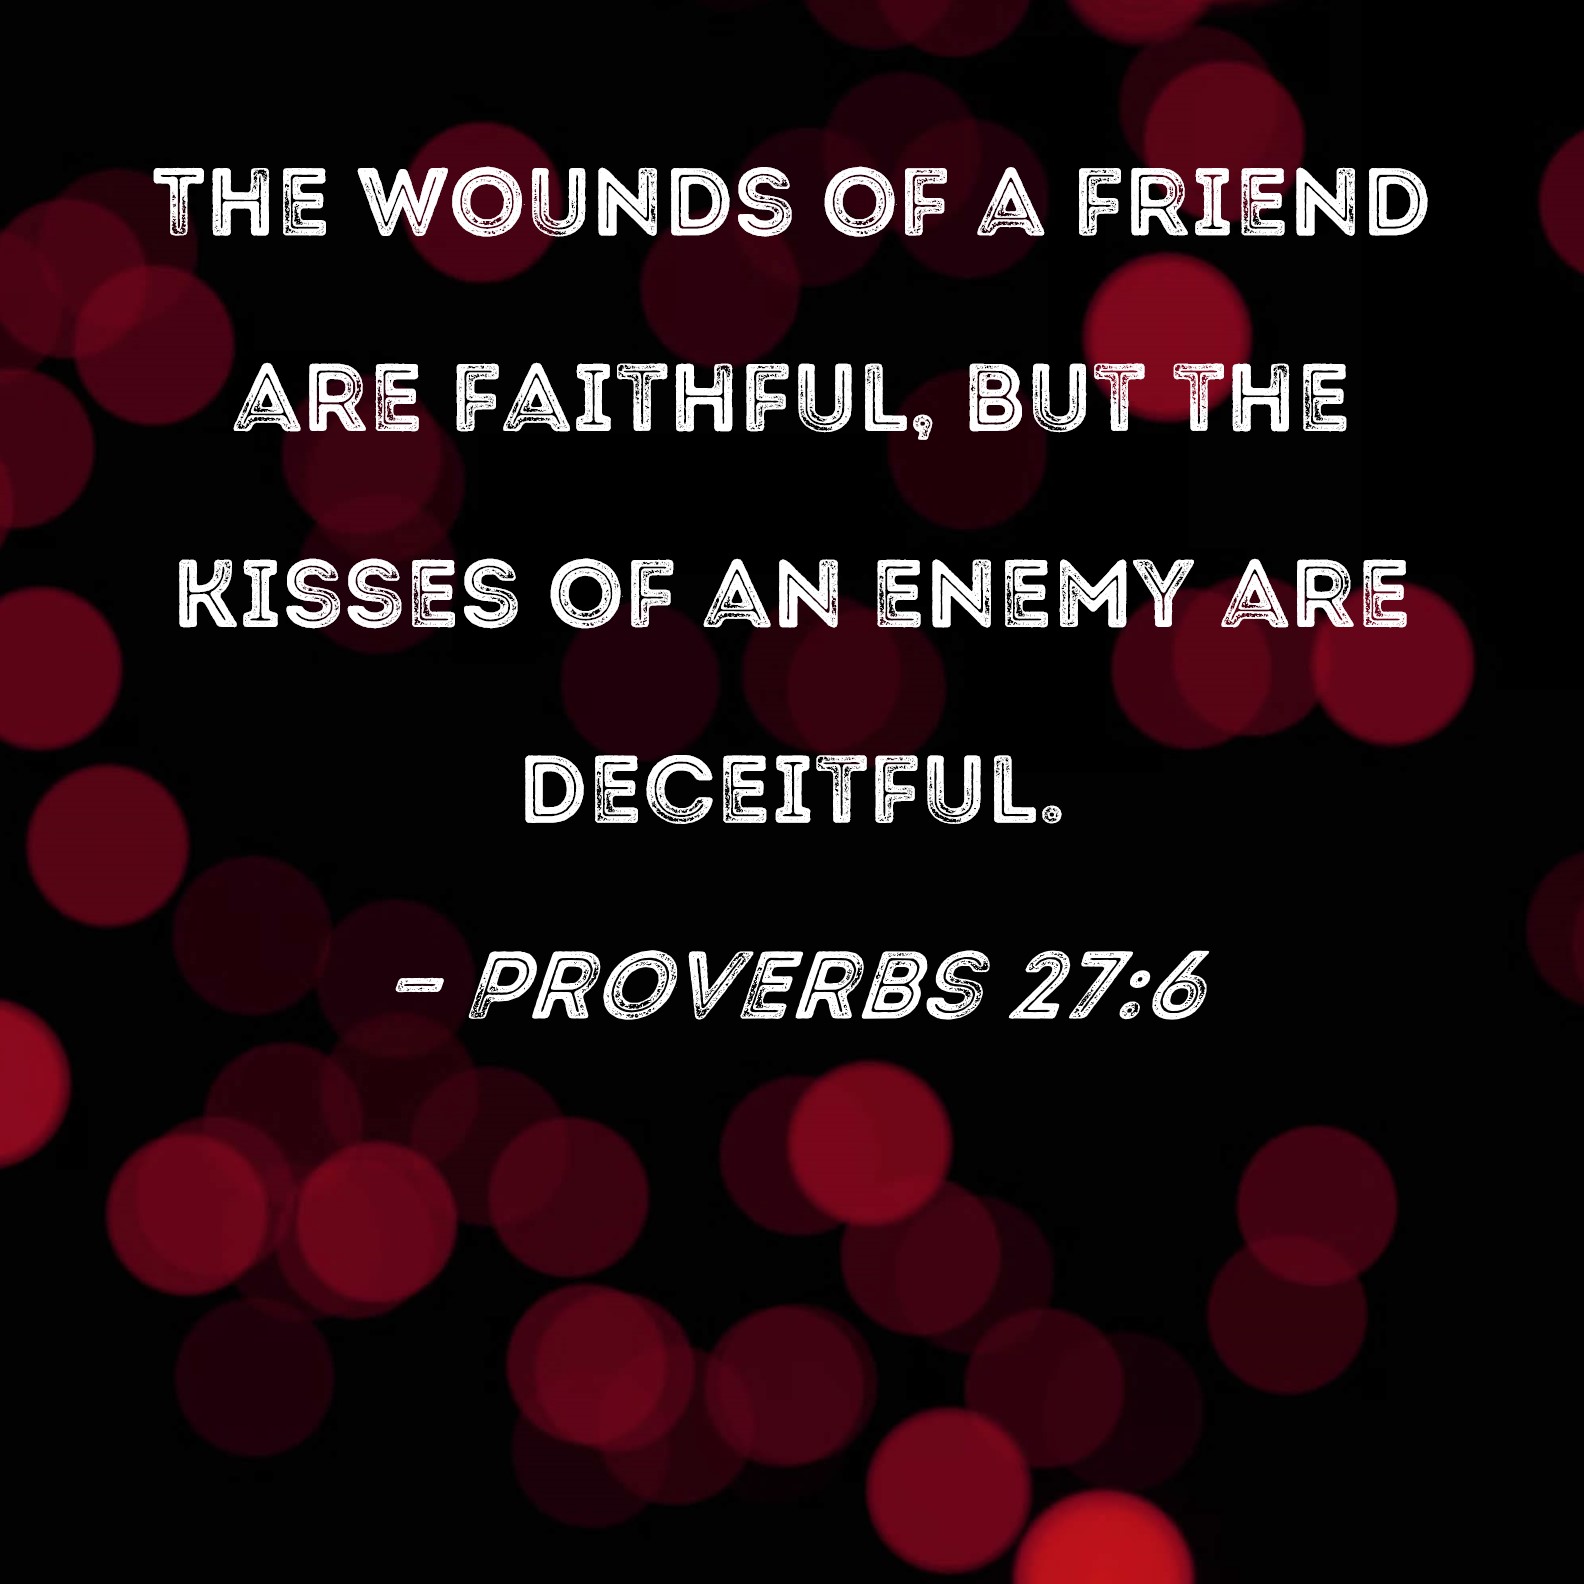 Faithful Are the Wounds of a Friend